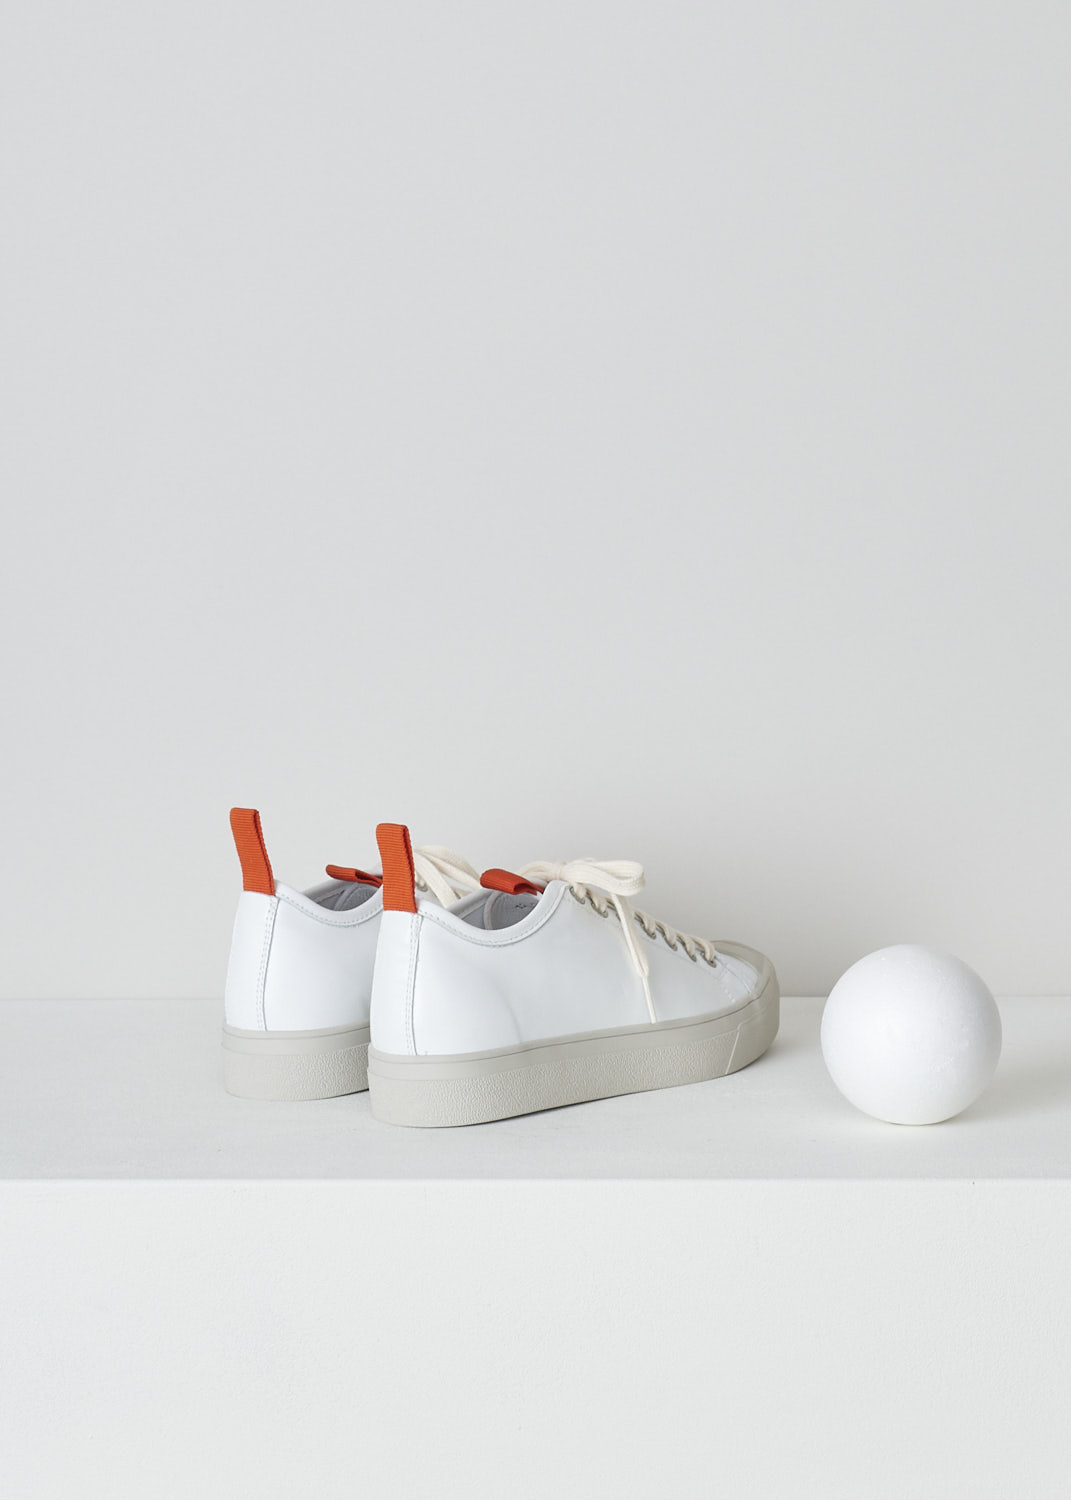 SOFIE Dâ€™HOORE, WHITE LEATHER SNEAKERS WITH RED ACCENTS, FABLE_LCOL_WHCL, White, Back, These white leather sneakers feature a front lace-up closure with white laces. Red pull-tabs can be found on the back of the heel and on the front of the tongue. These sneakers have a round toe with a beige rubber toe cap that goes down into the rubber sole in that same beige color. 

